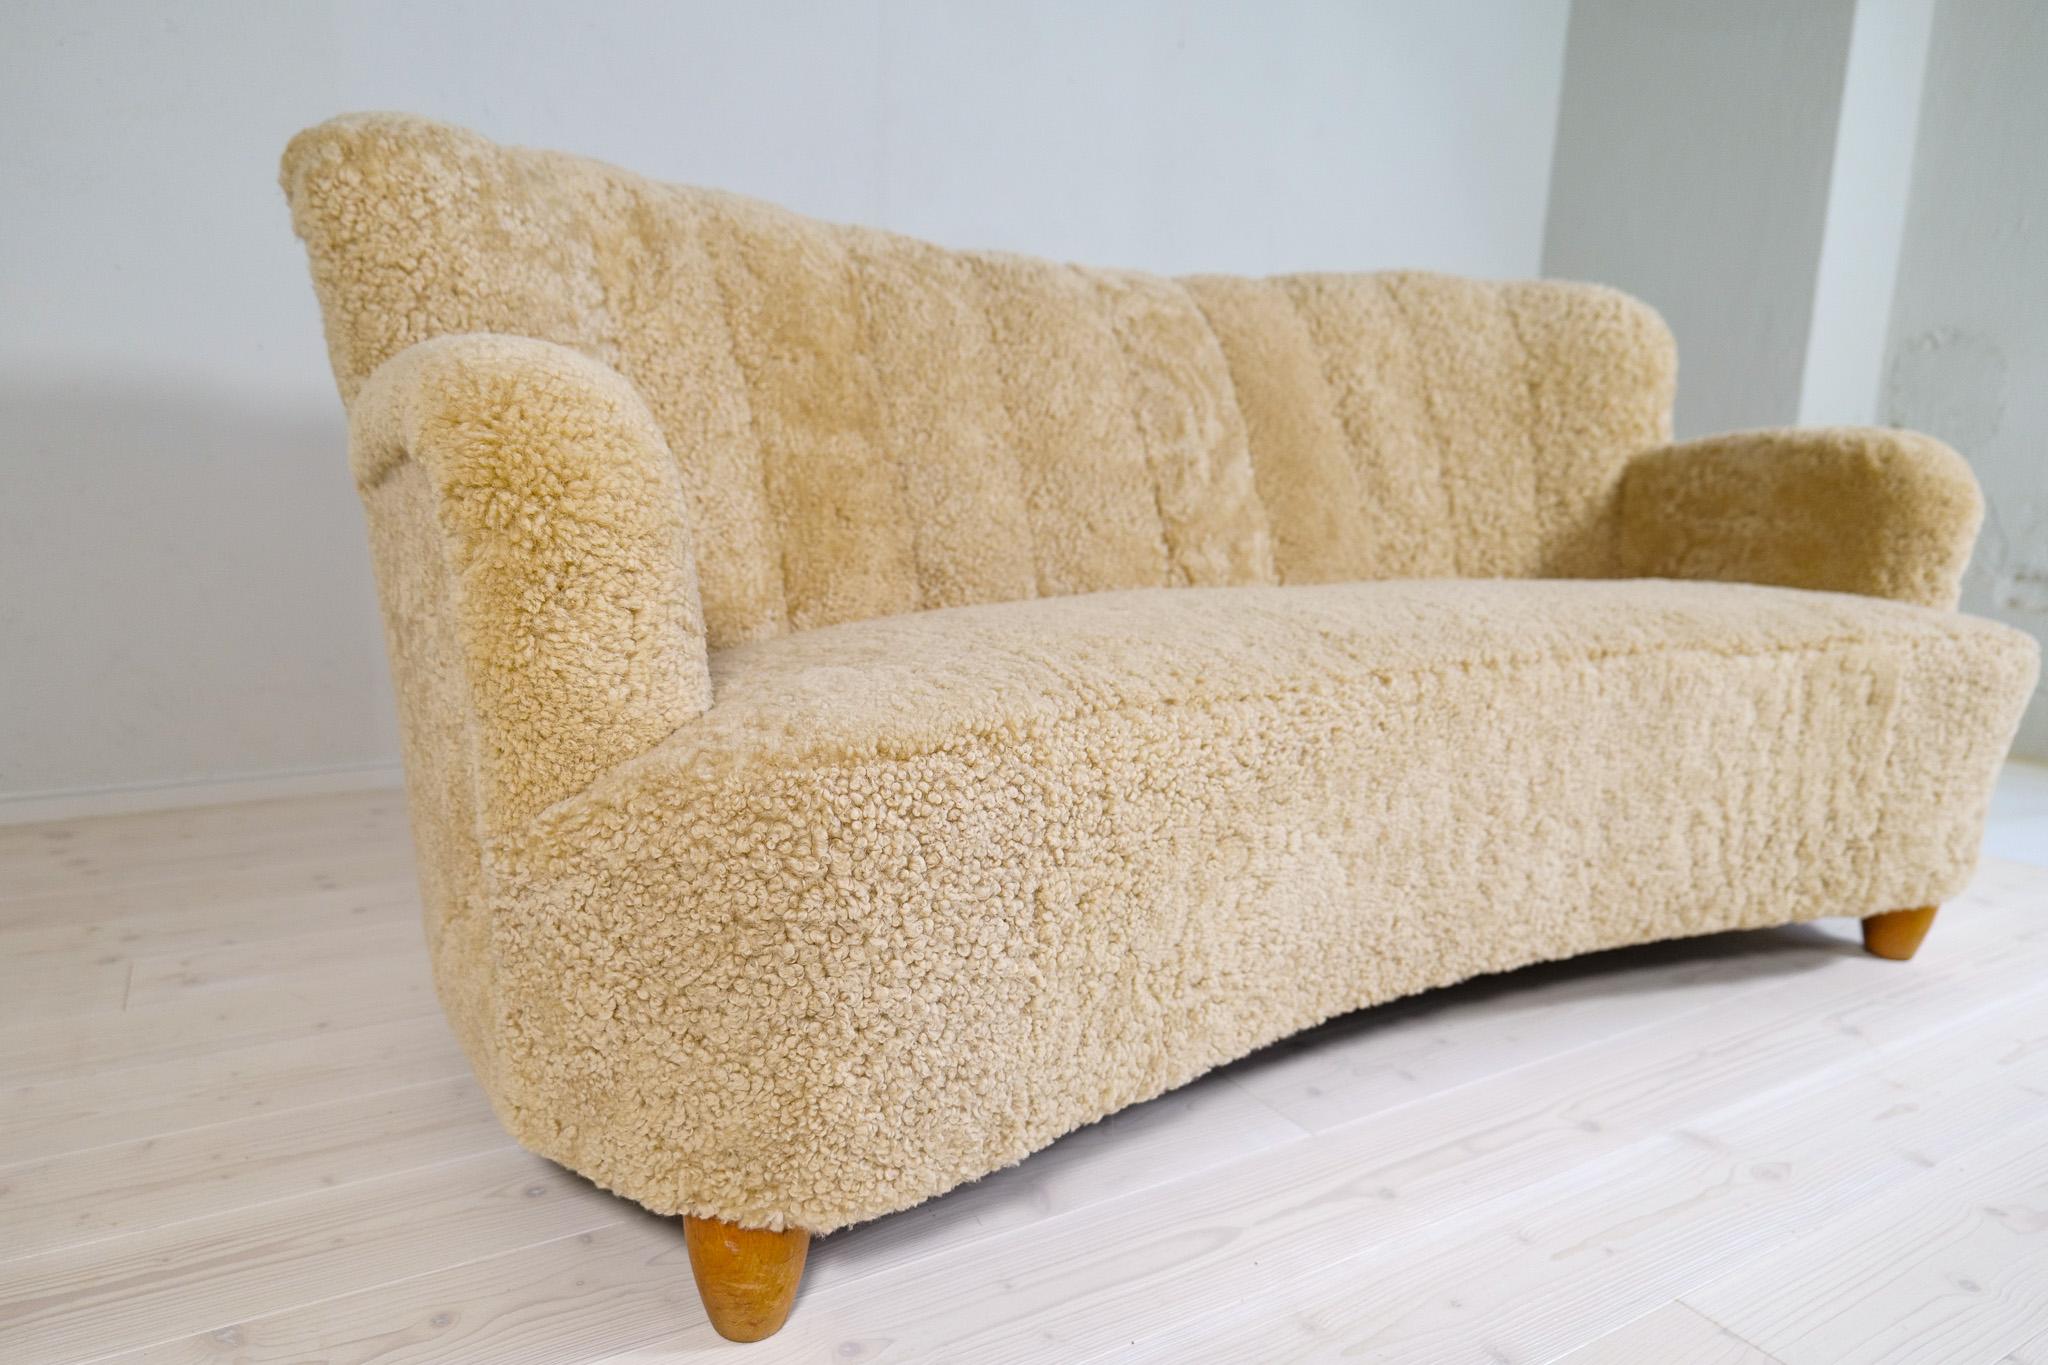 Mid-20th Century Midcentury Sculptrual Sheepskin/Shearling Sofa in Manors of Marta Blomstedt